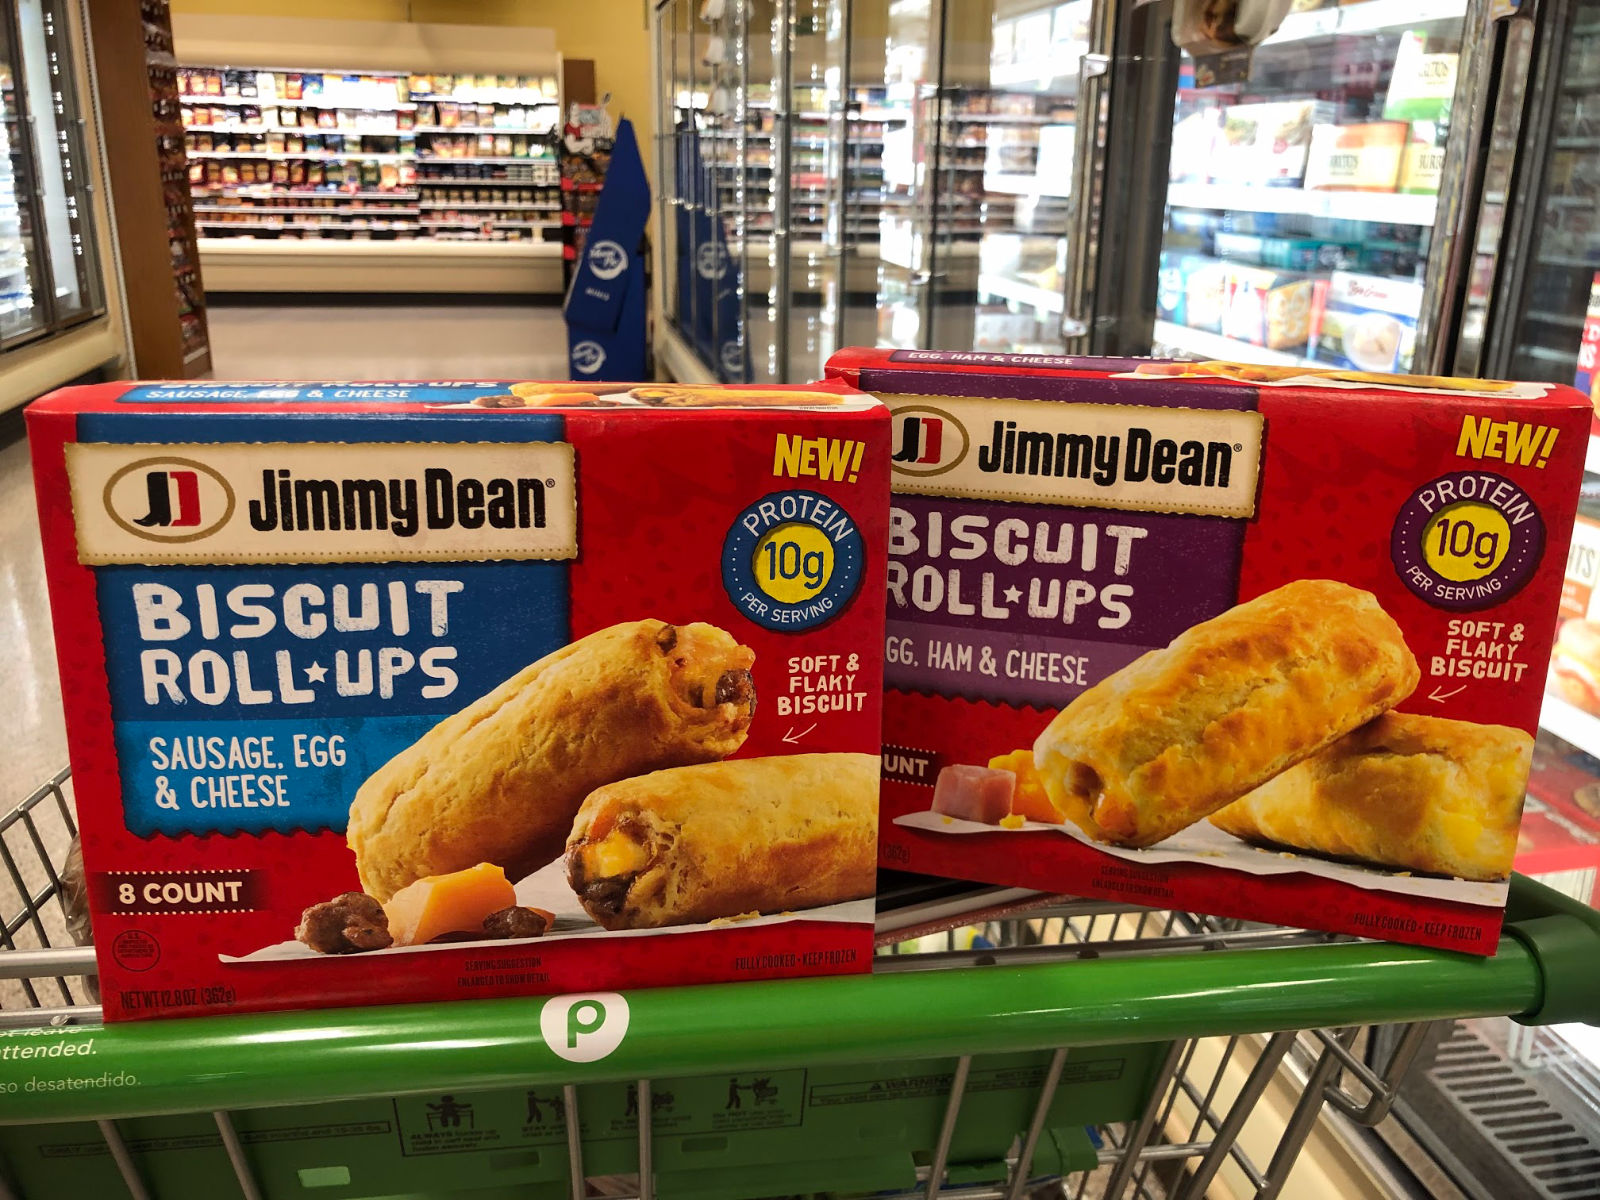 Super Deal On NEW Jimmy Dean Biscuit Roll-Ups Available Now At Publix on I Heart Publix 2